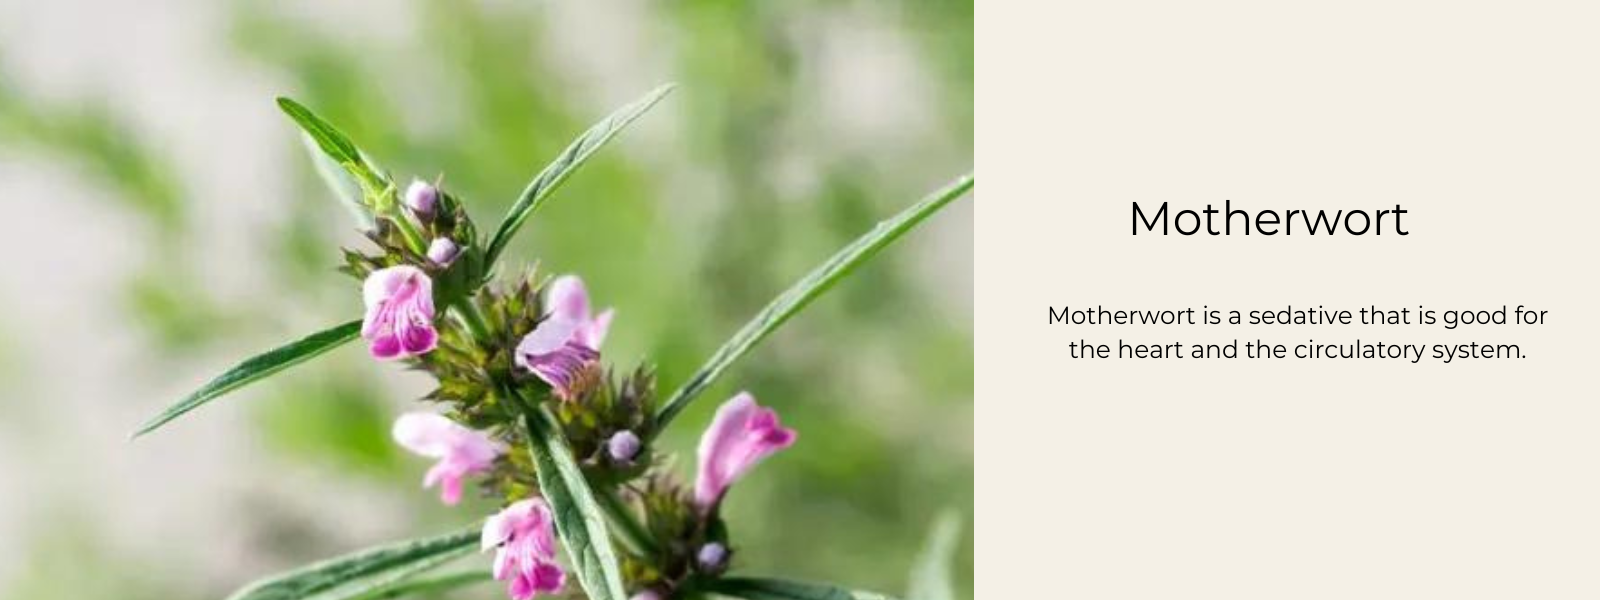 Motherwort - Health Benefits, Uses and Important Facts